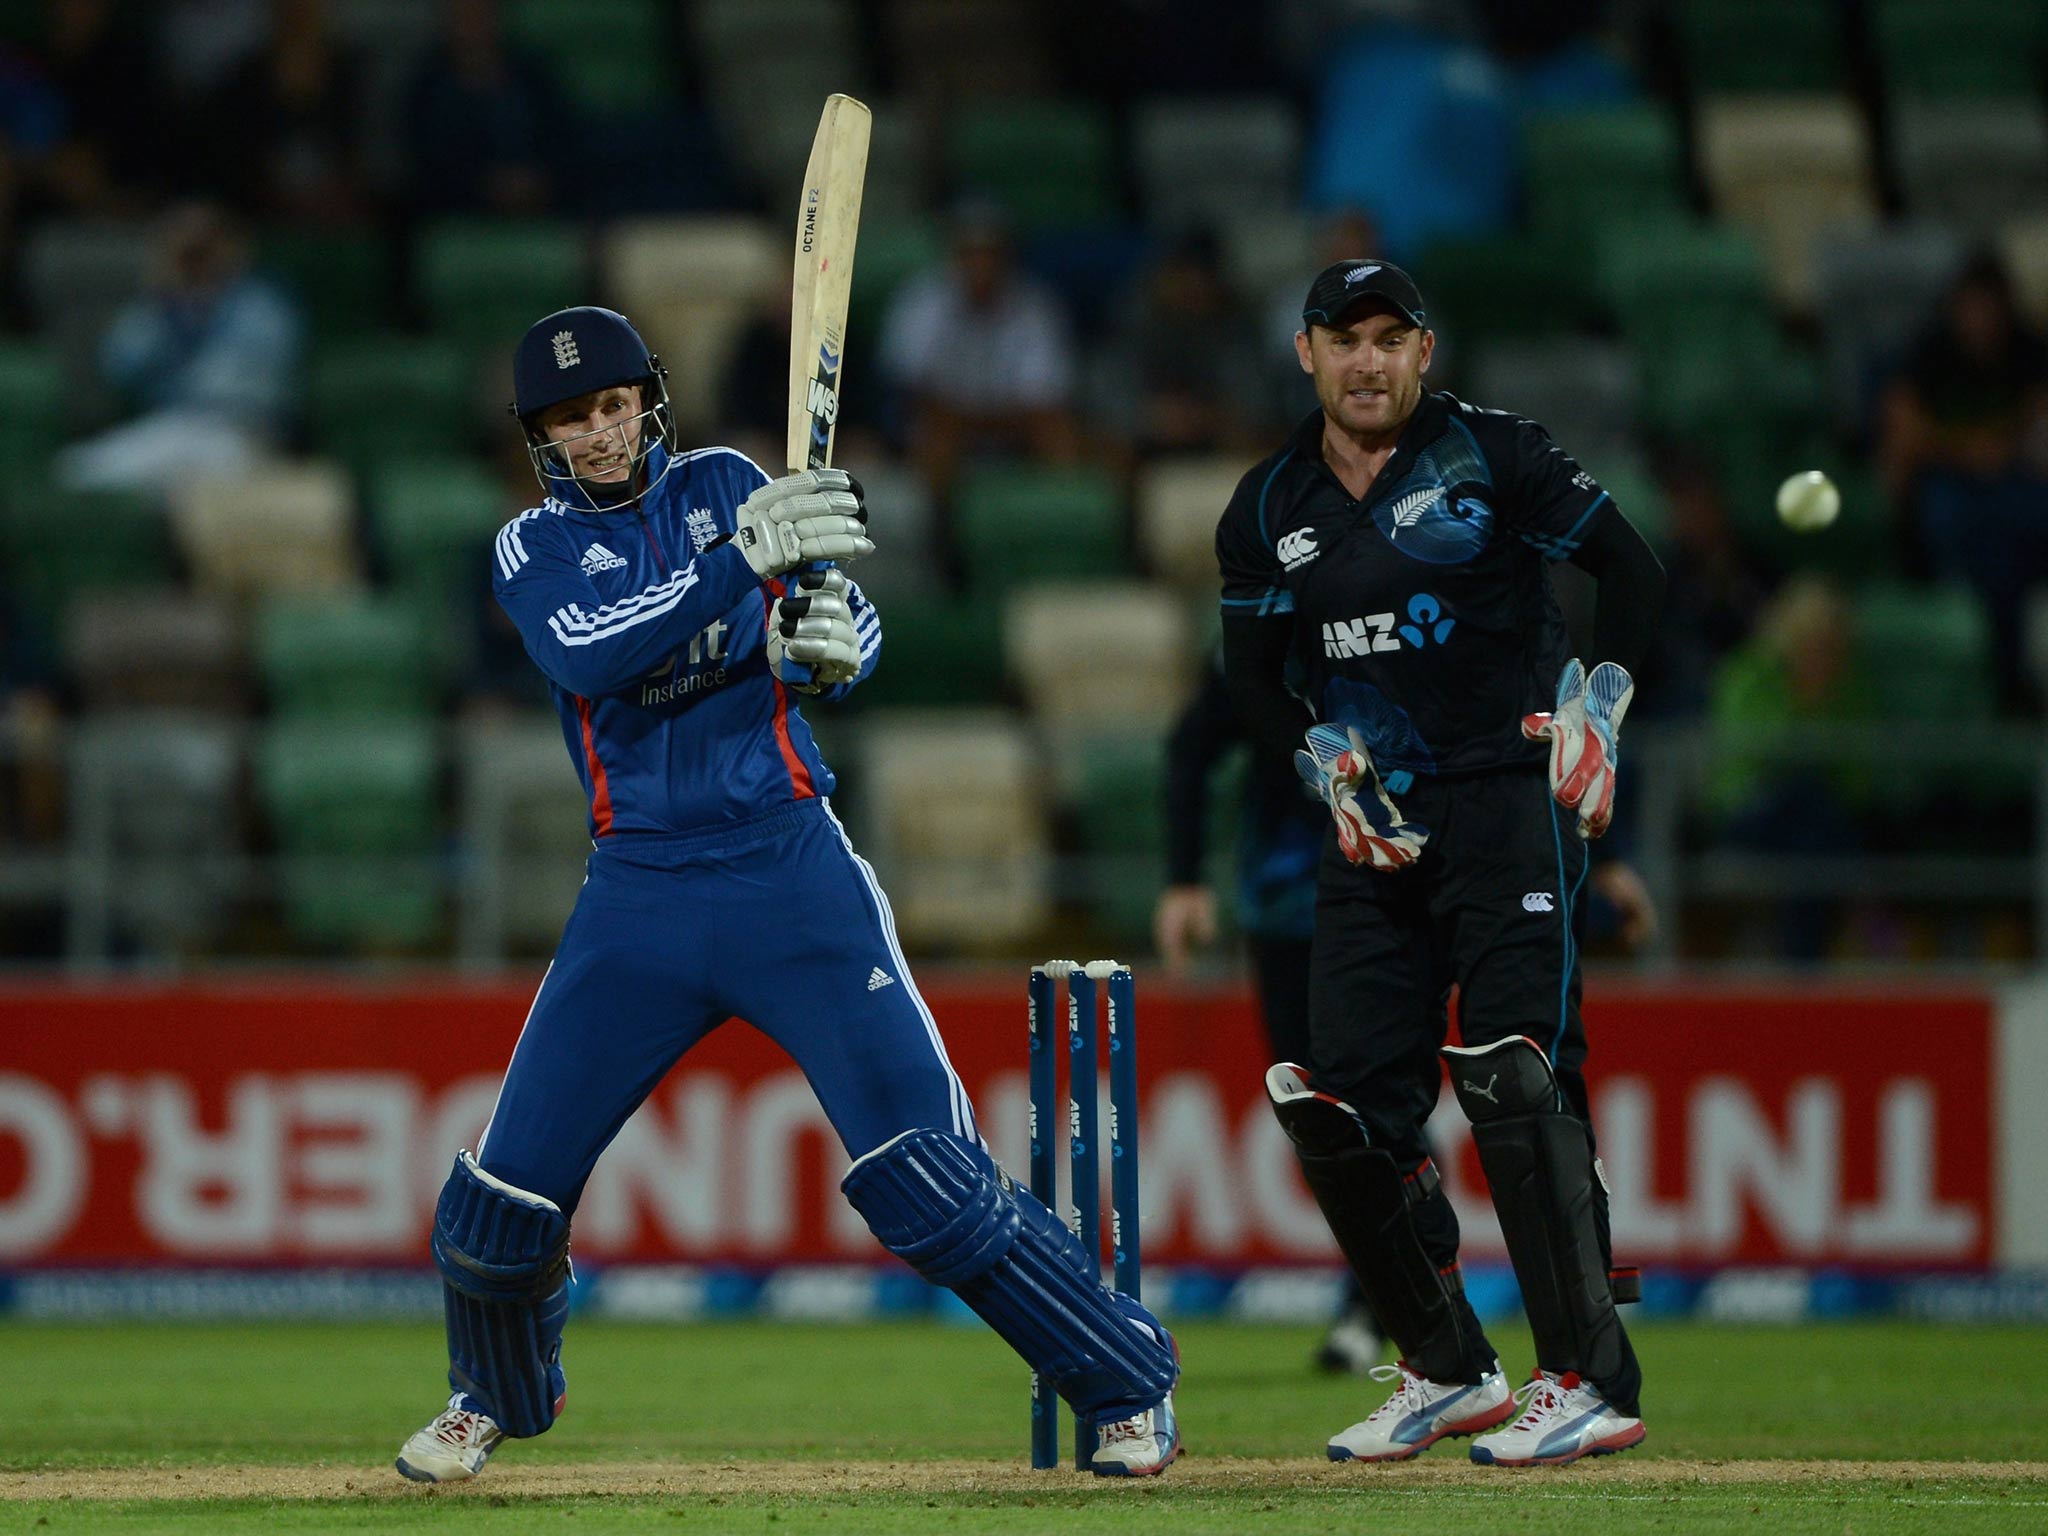 Joe Root in action against New Zealand